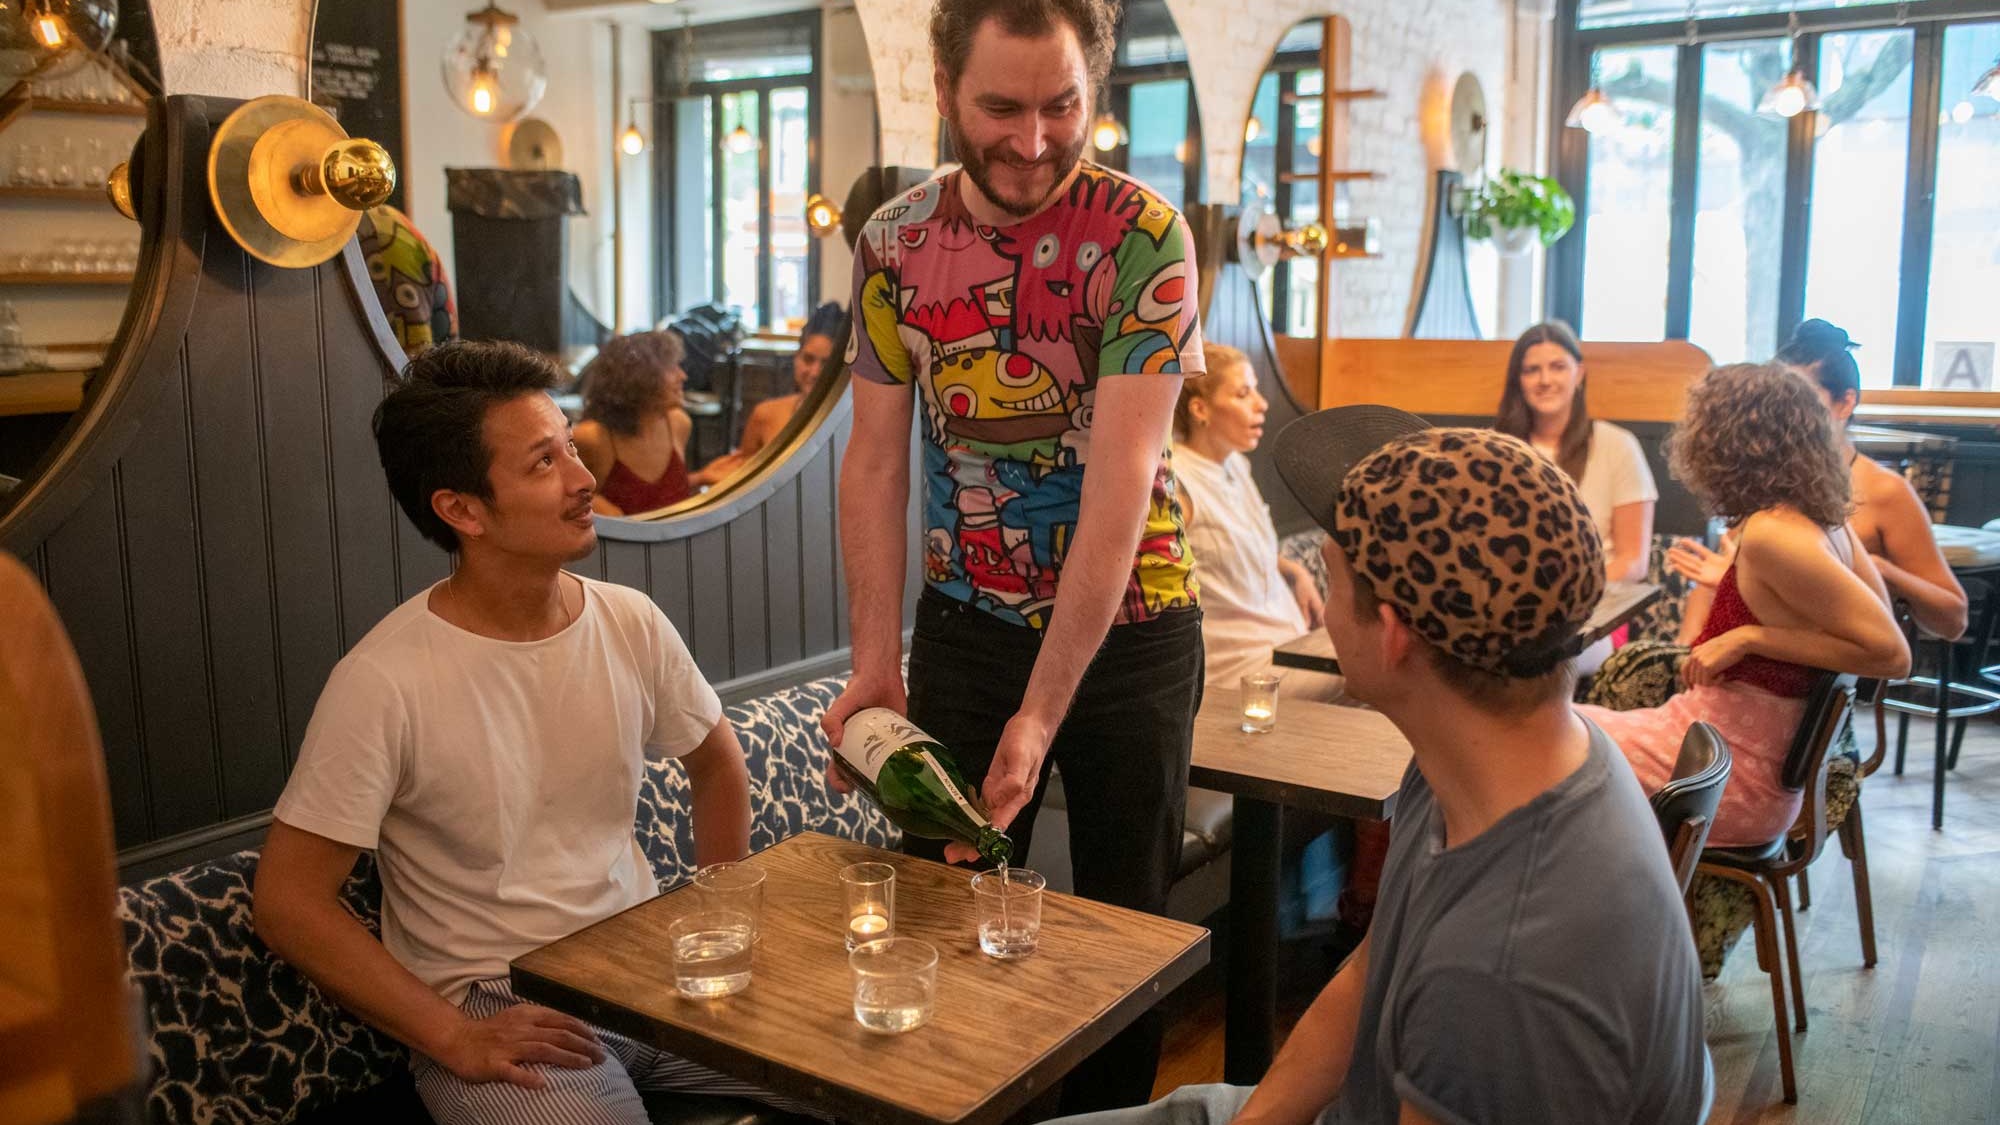 Austin Power, center, wants everyone to find a context to drink sake. // Photo courtesy of Accidental Bar